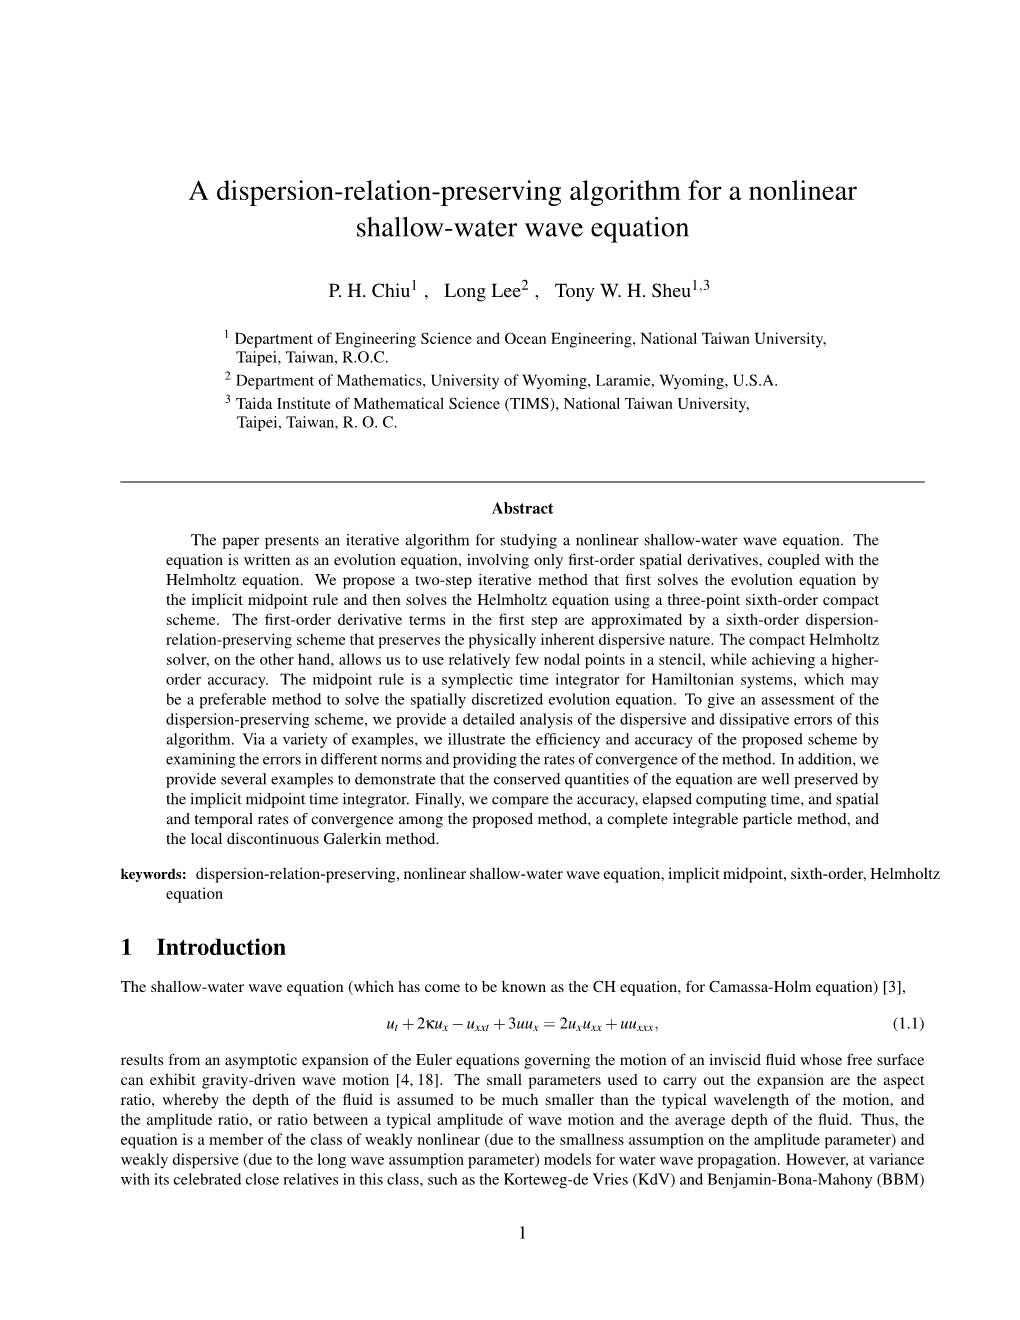 A Dispersion-Relation-Preserving Algorithm for a Nonlinear Shallow-Water Wave Equation